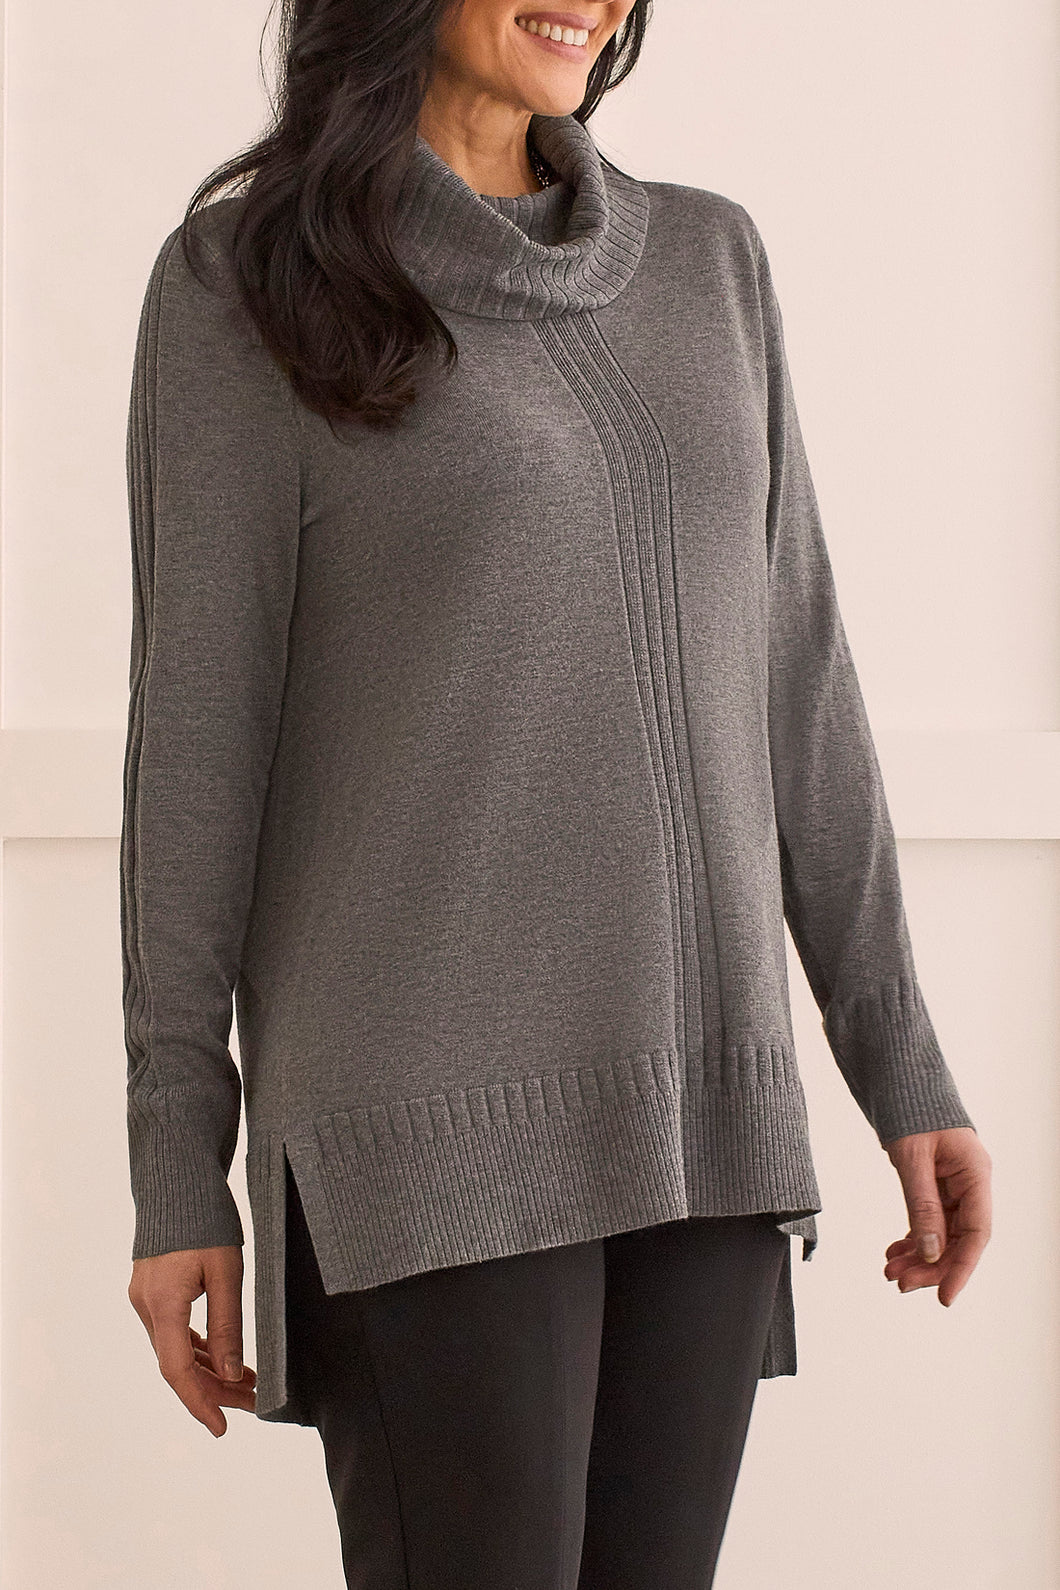 Tribal Cowl Neck Sweater - Style 14720